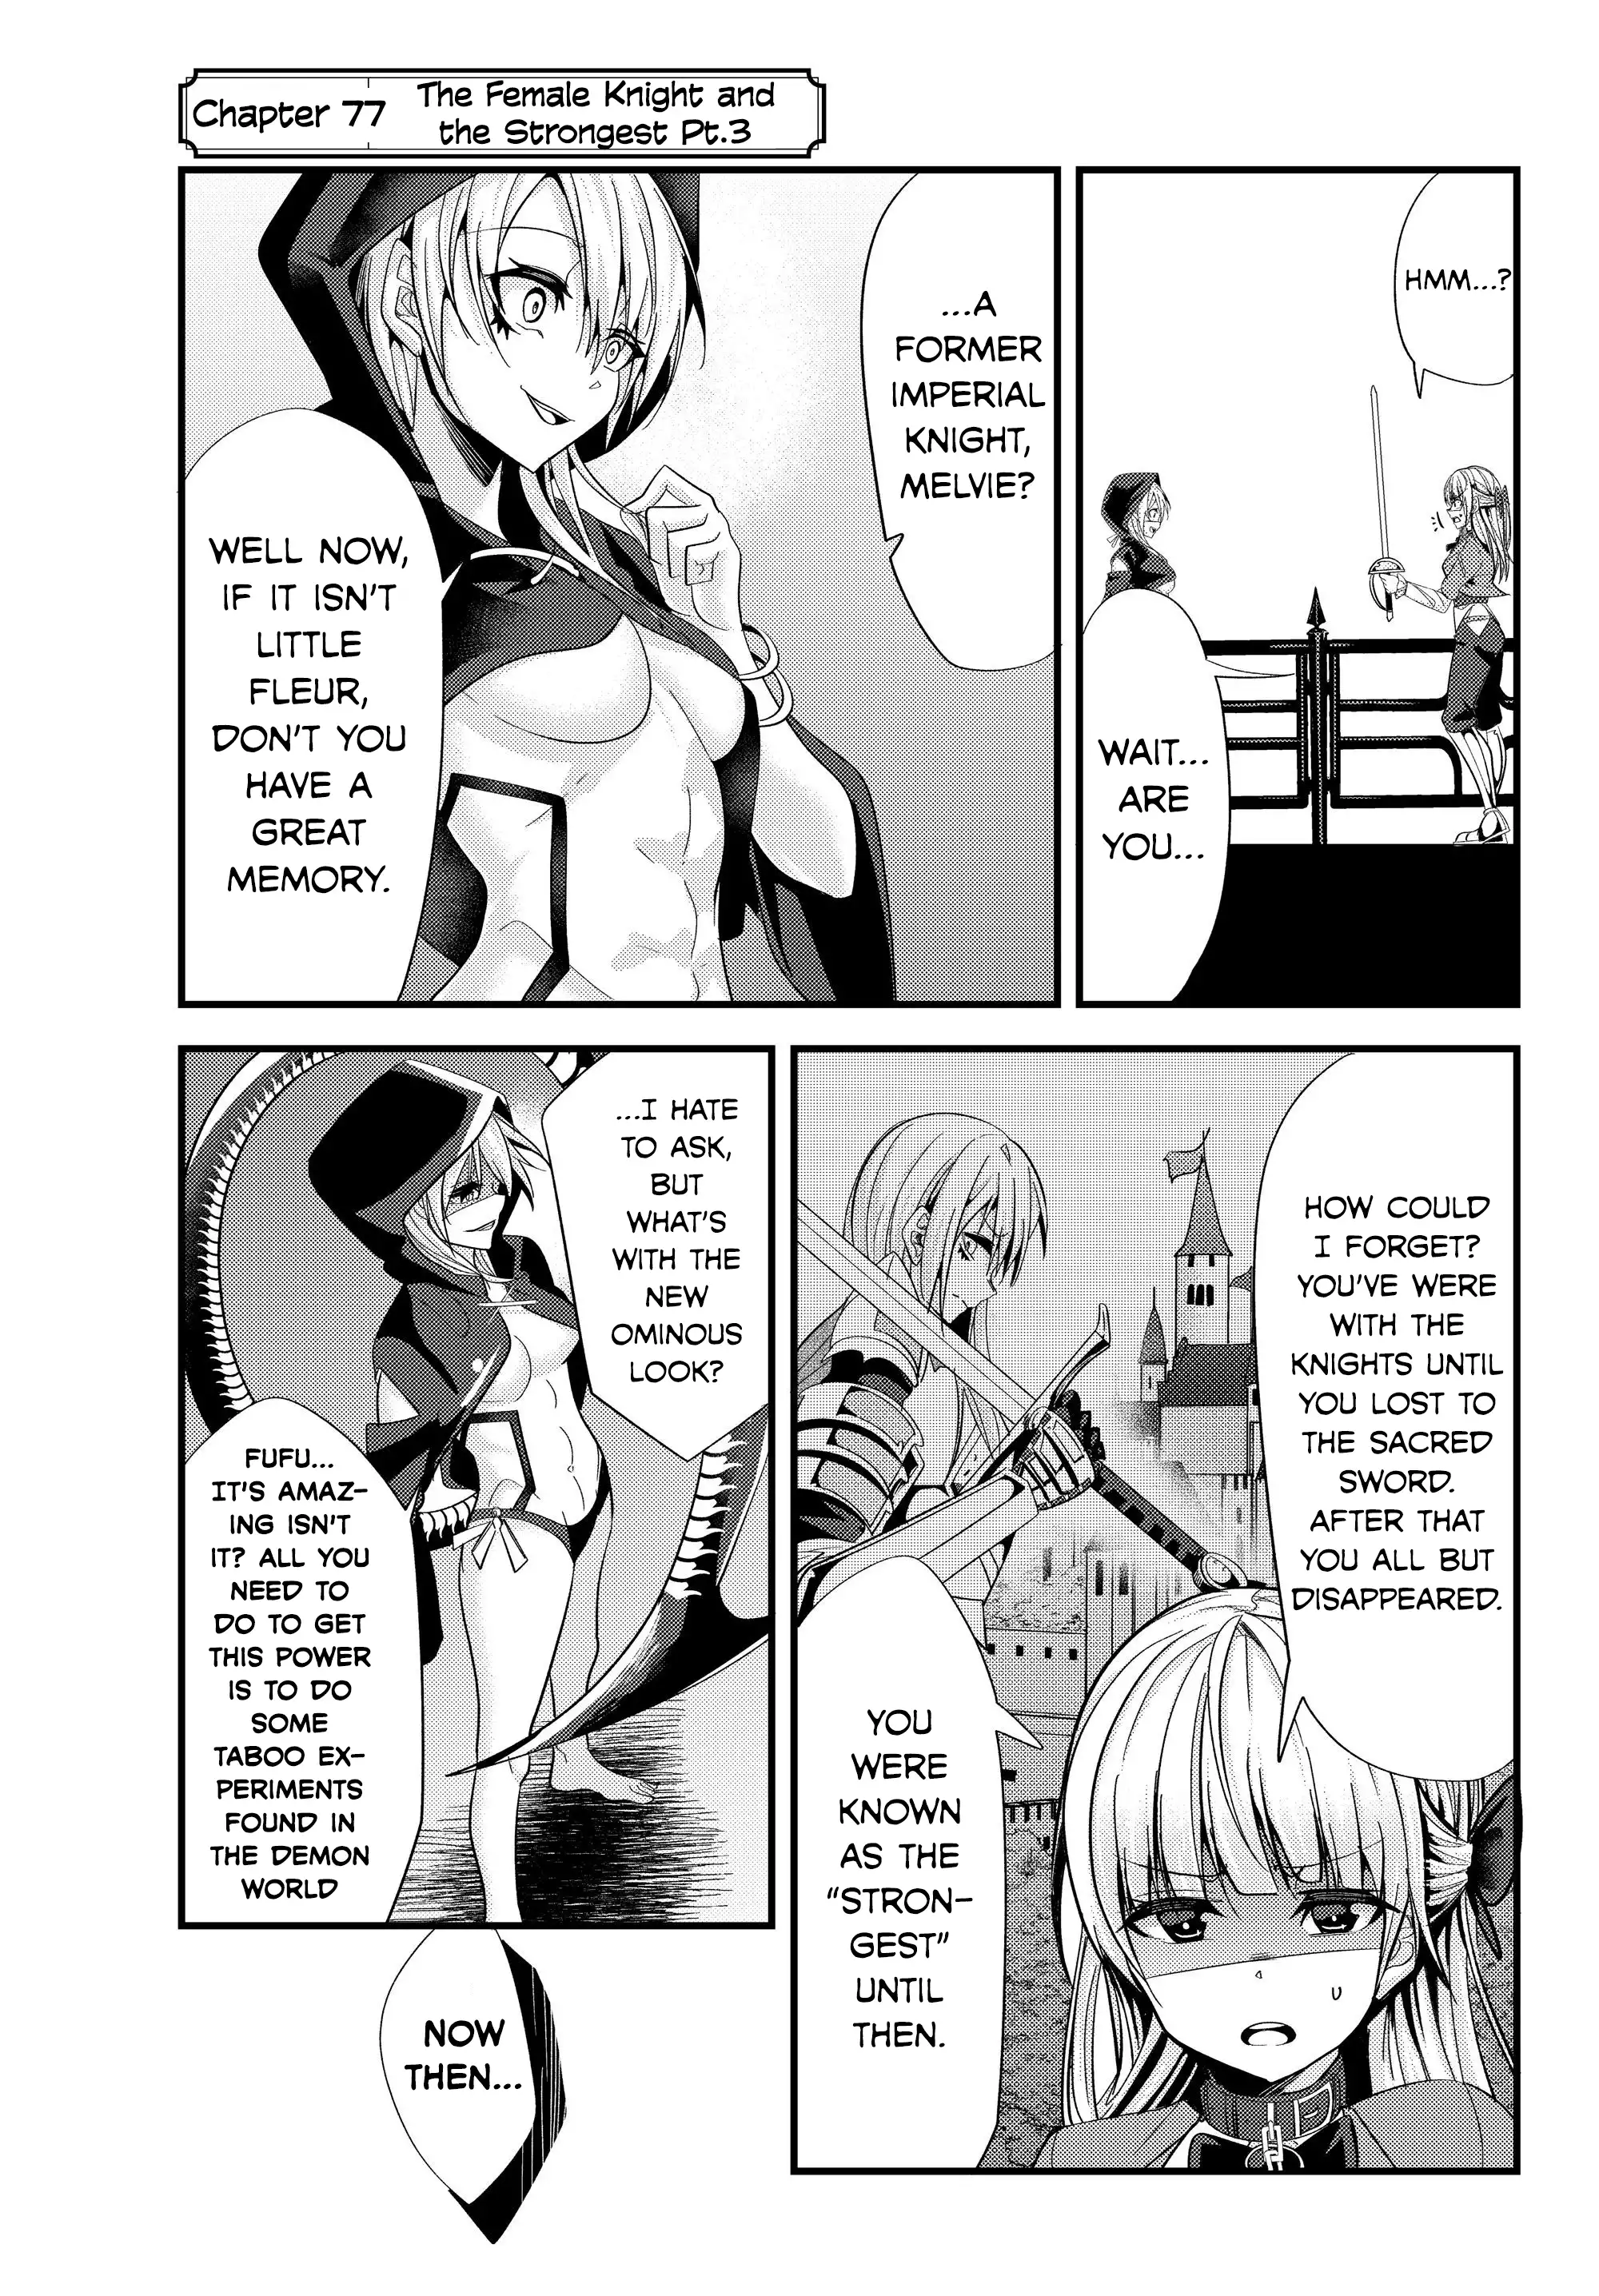 A Story About Treating a Female Knight, Who Has Never Been Treated as a Woman, as a Woman - Chapter 77 Page 1